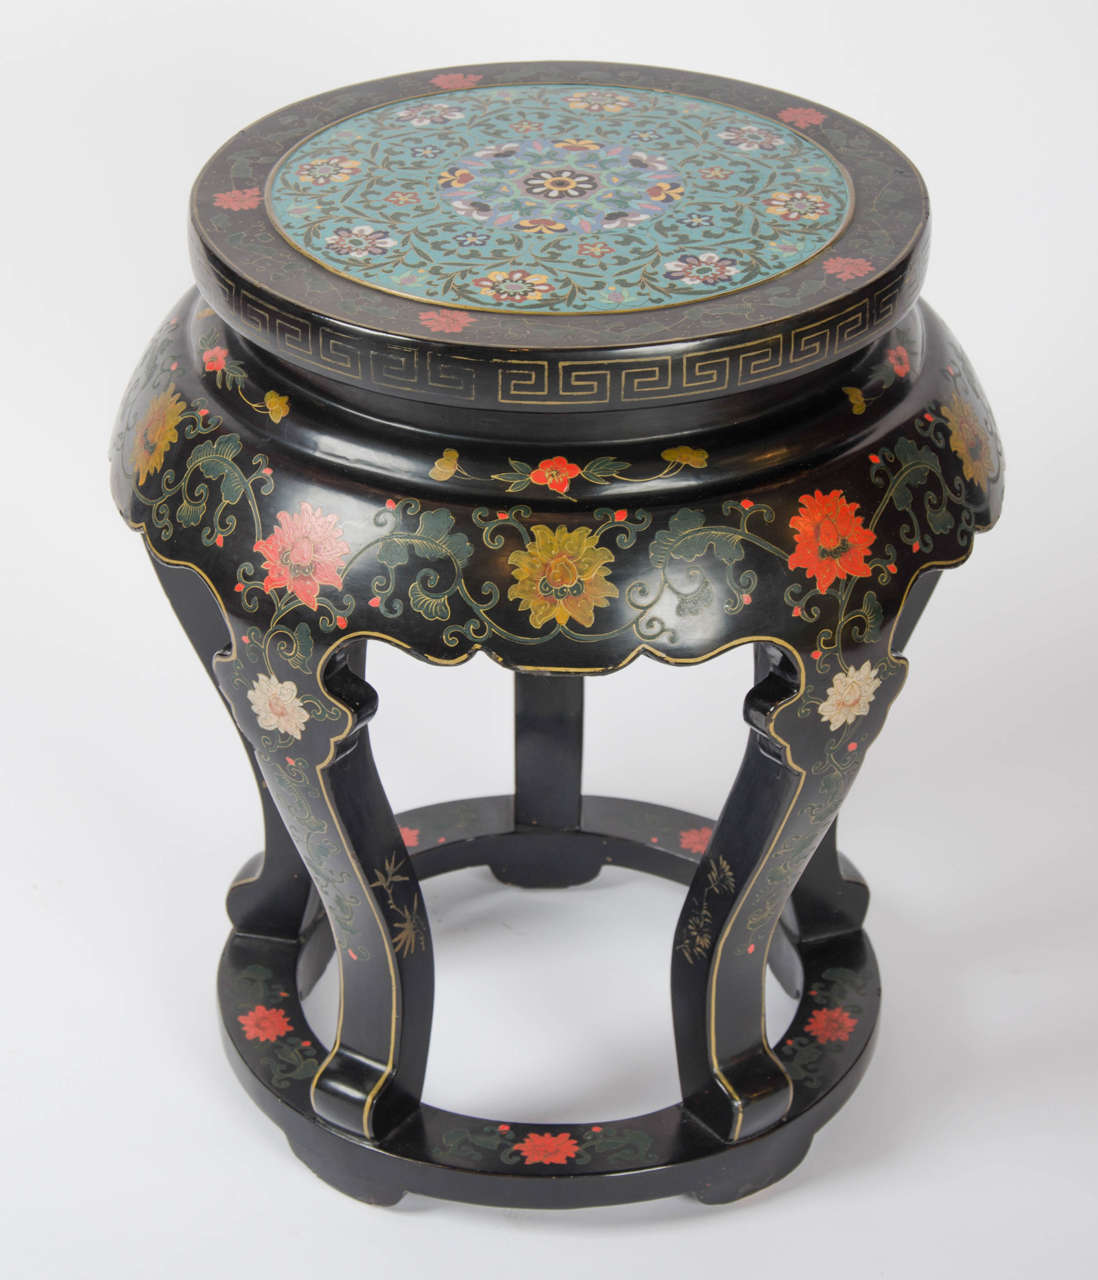 A superb circular Chinese side table of black lacquer and painted decoration with a fabulous blue enamel cloisonné inset top.